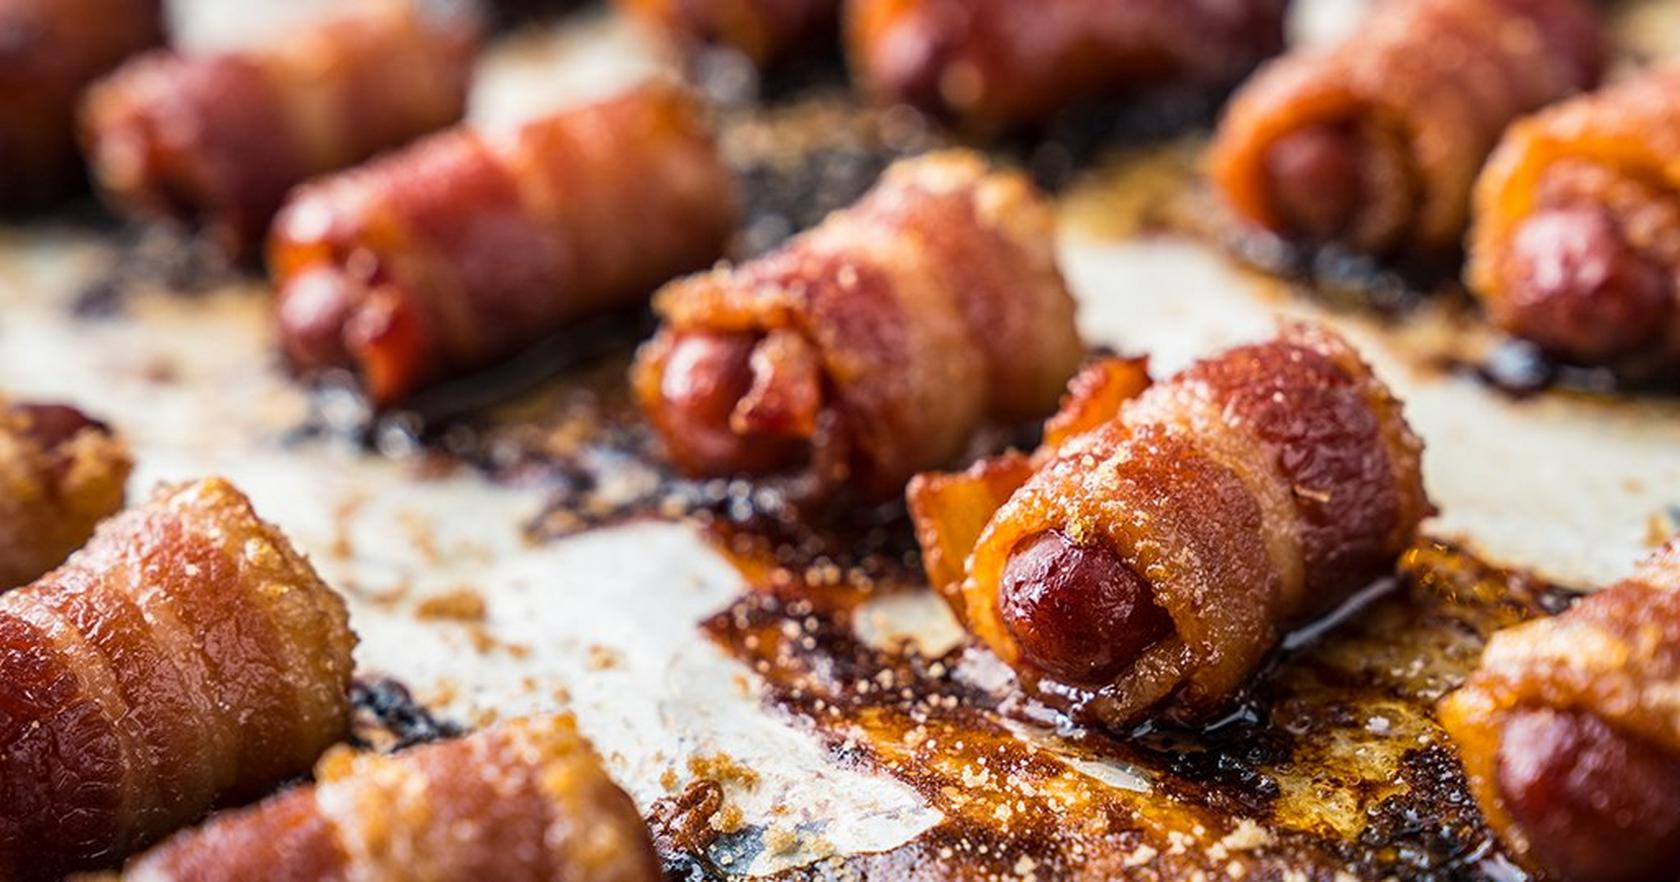 image of Brown Sugar and Bacon Wrapped Lil Smokies